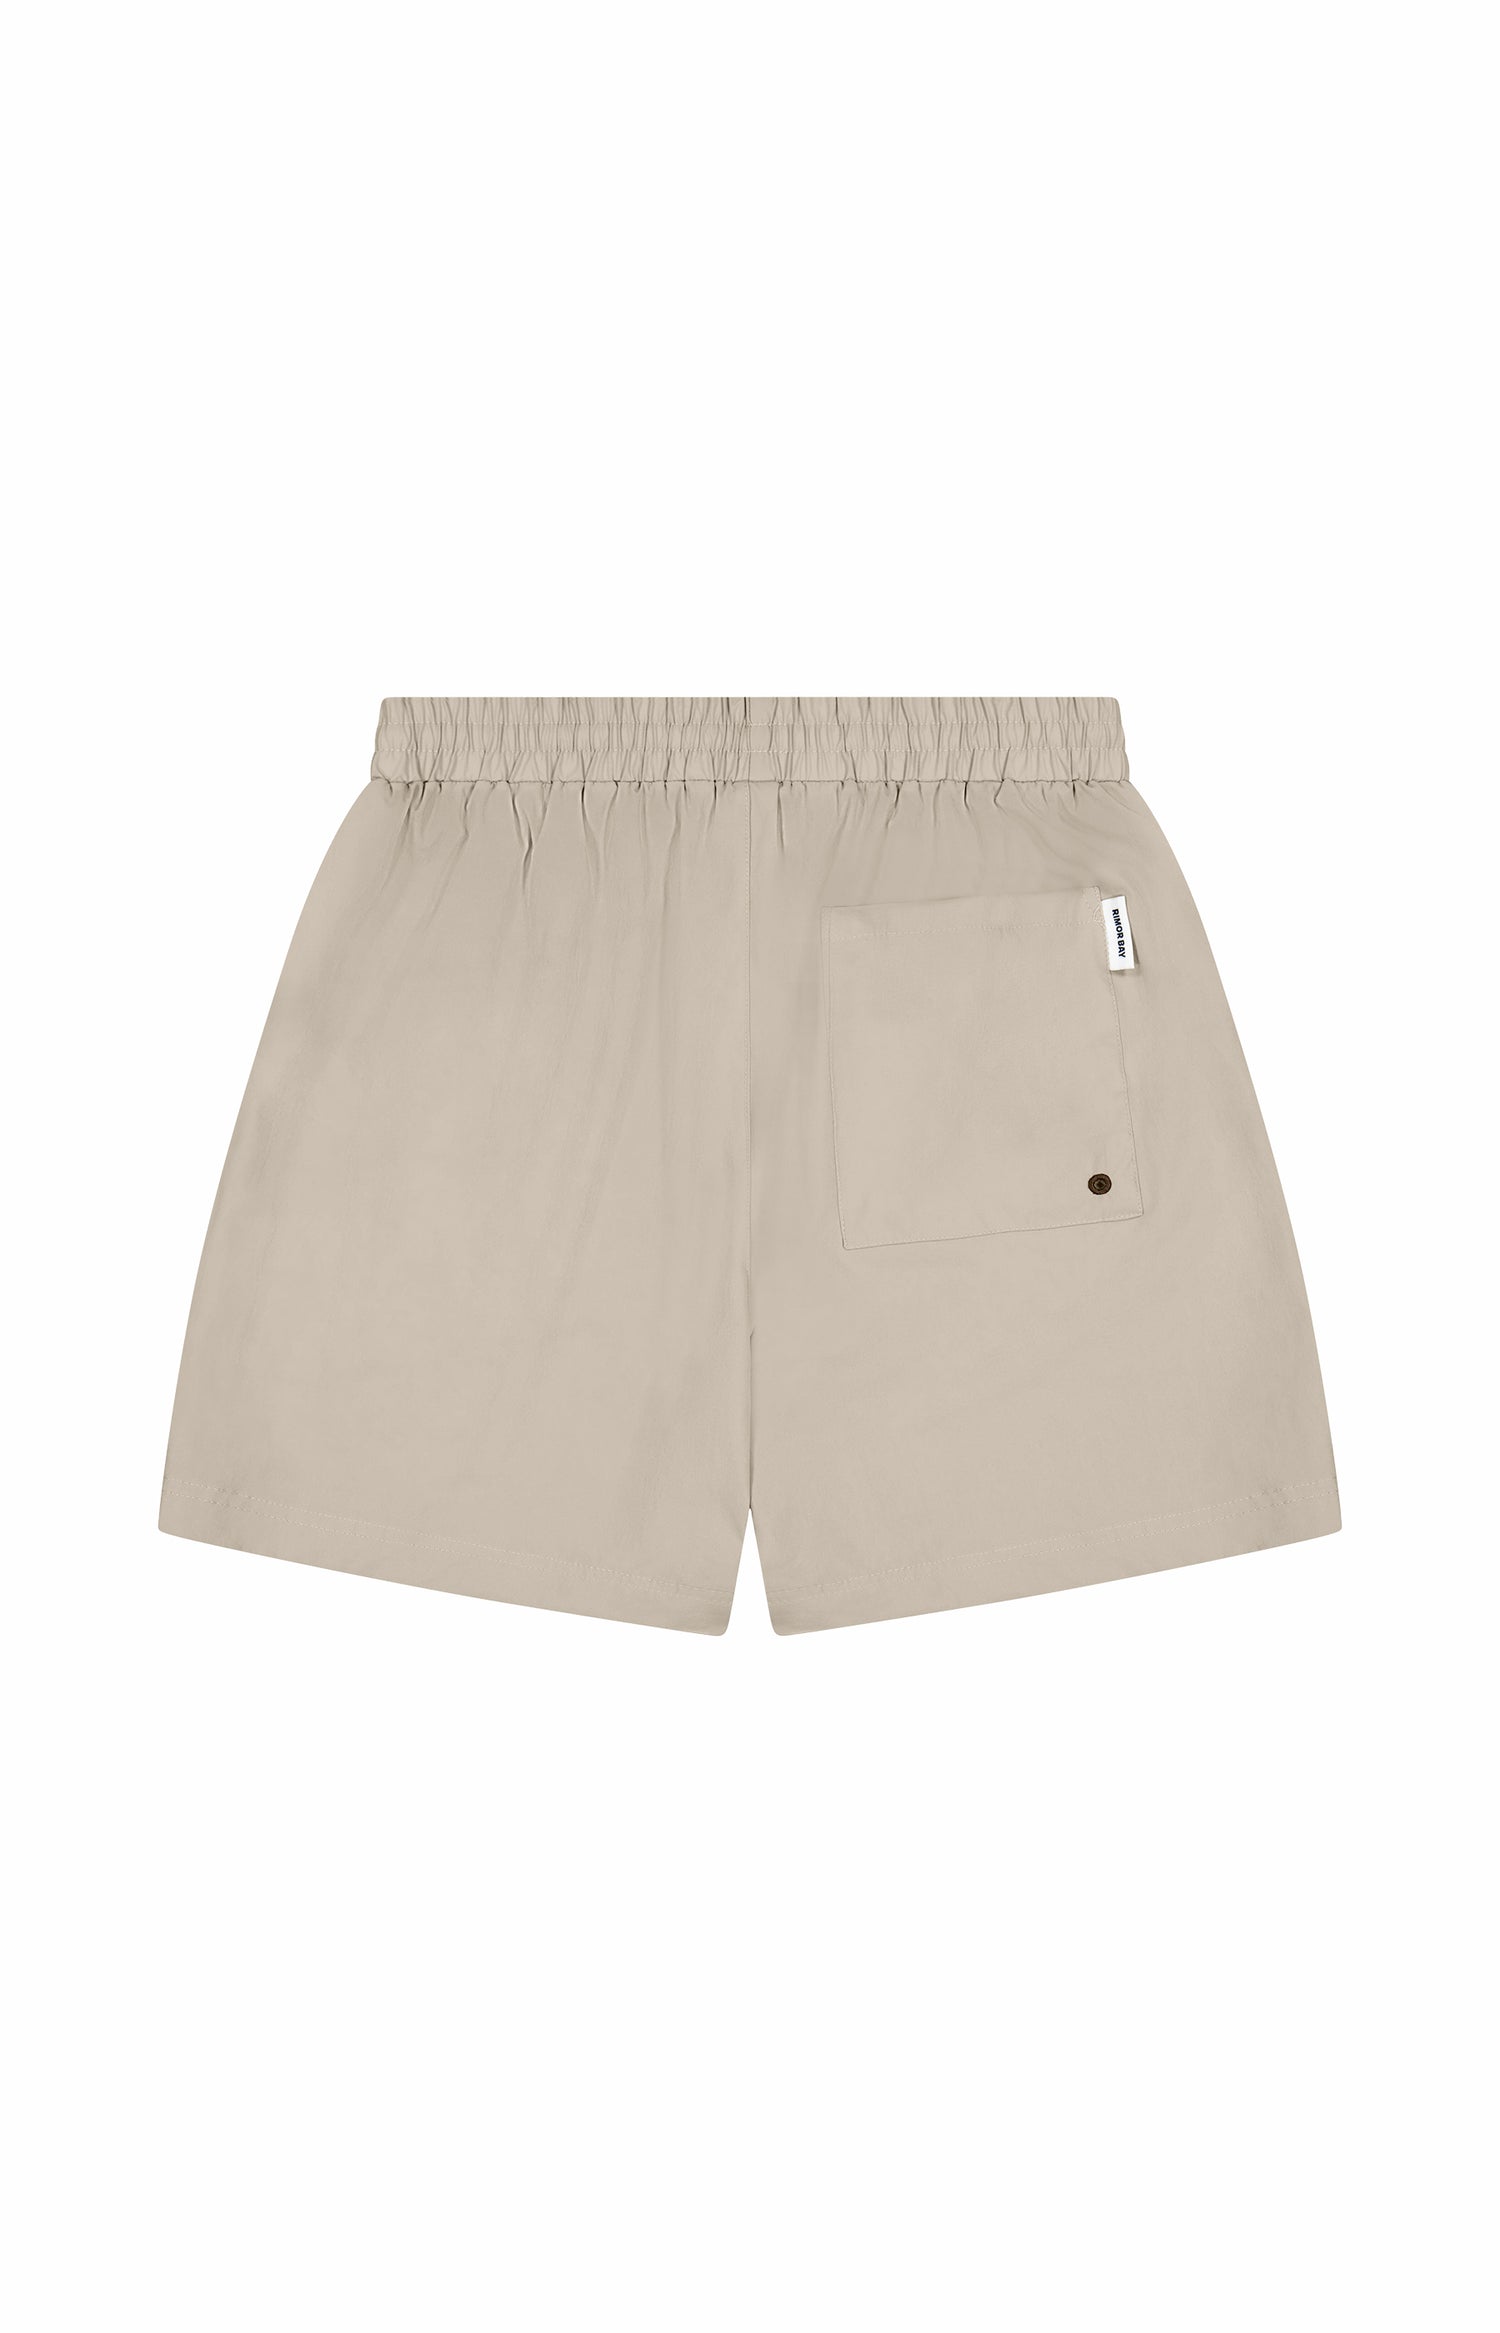 back of grey shorts with one pocket, and elastic waist band